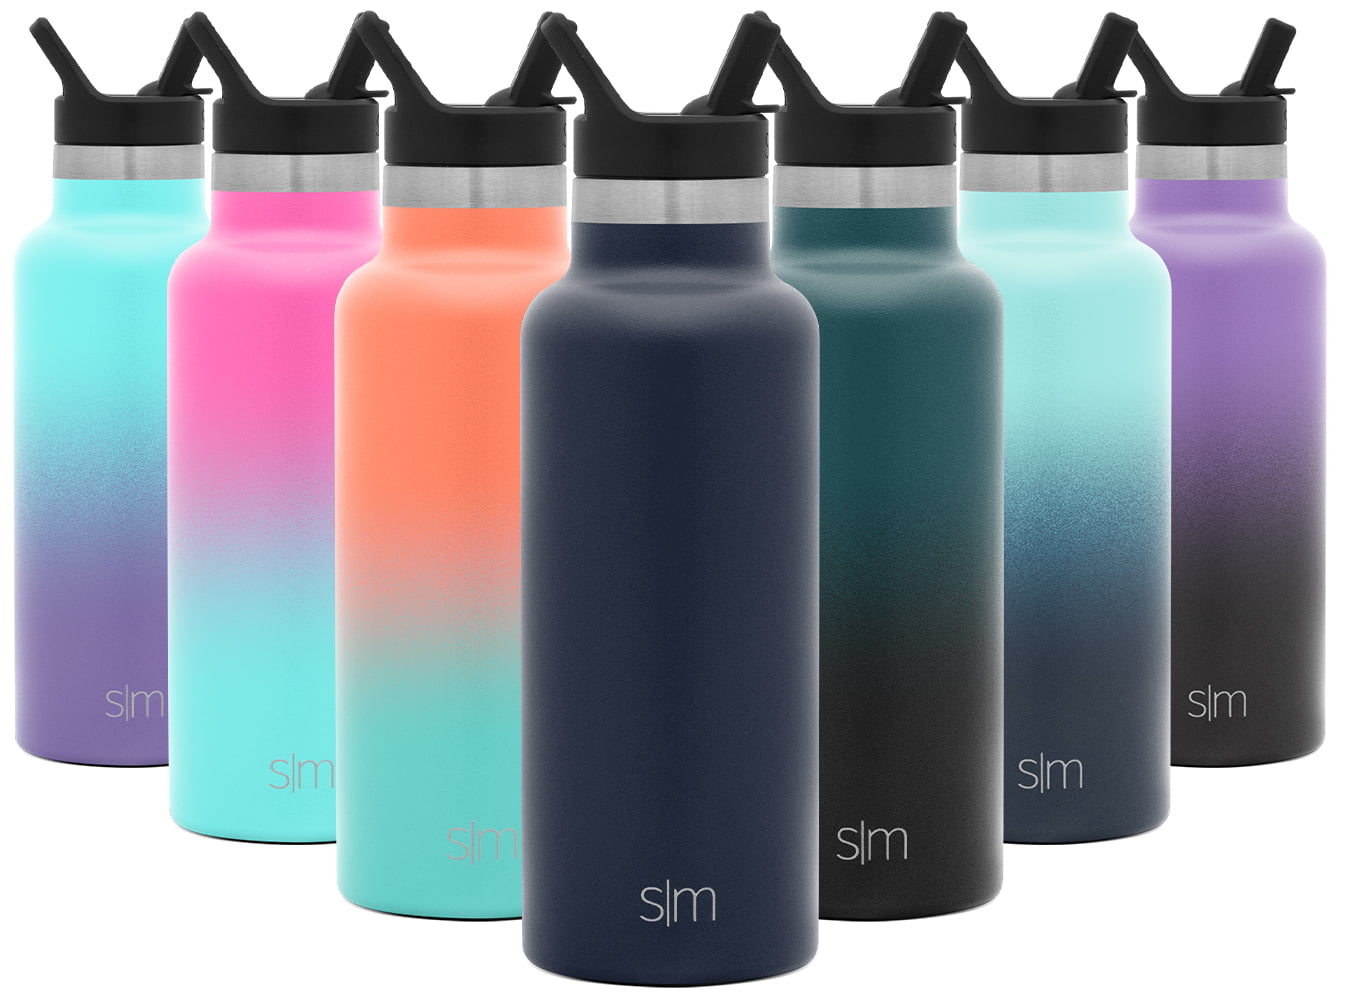 SIMPLE DRINK Stainless Steel Vacuum Insulated Travel Water Bottle with BPA Free Portable Lid Reusable Double Wall Metal Flask 100% Leak Proof for Kids Women and Men 